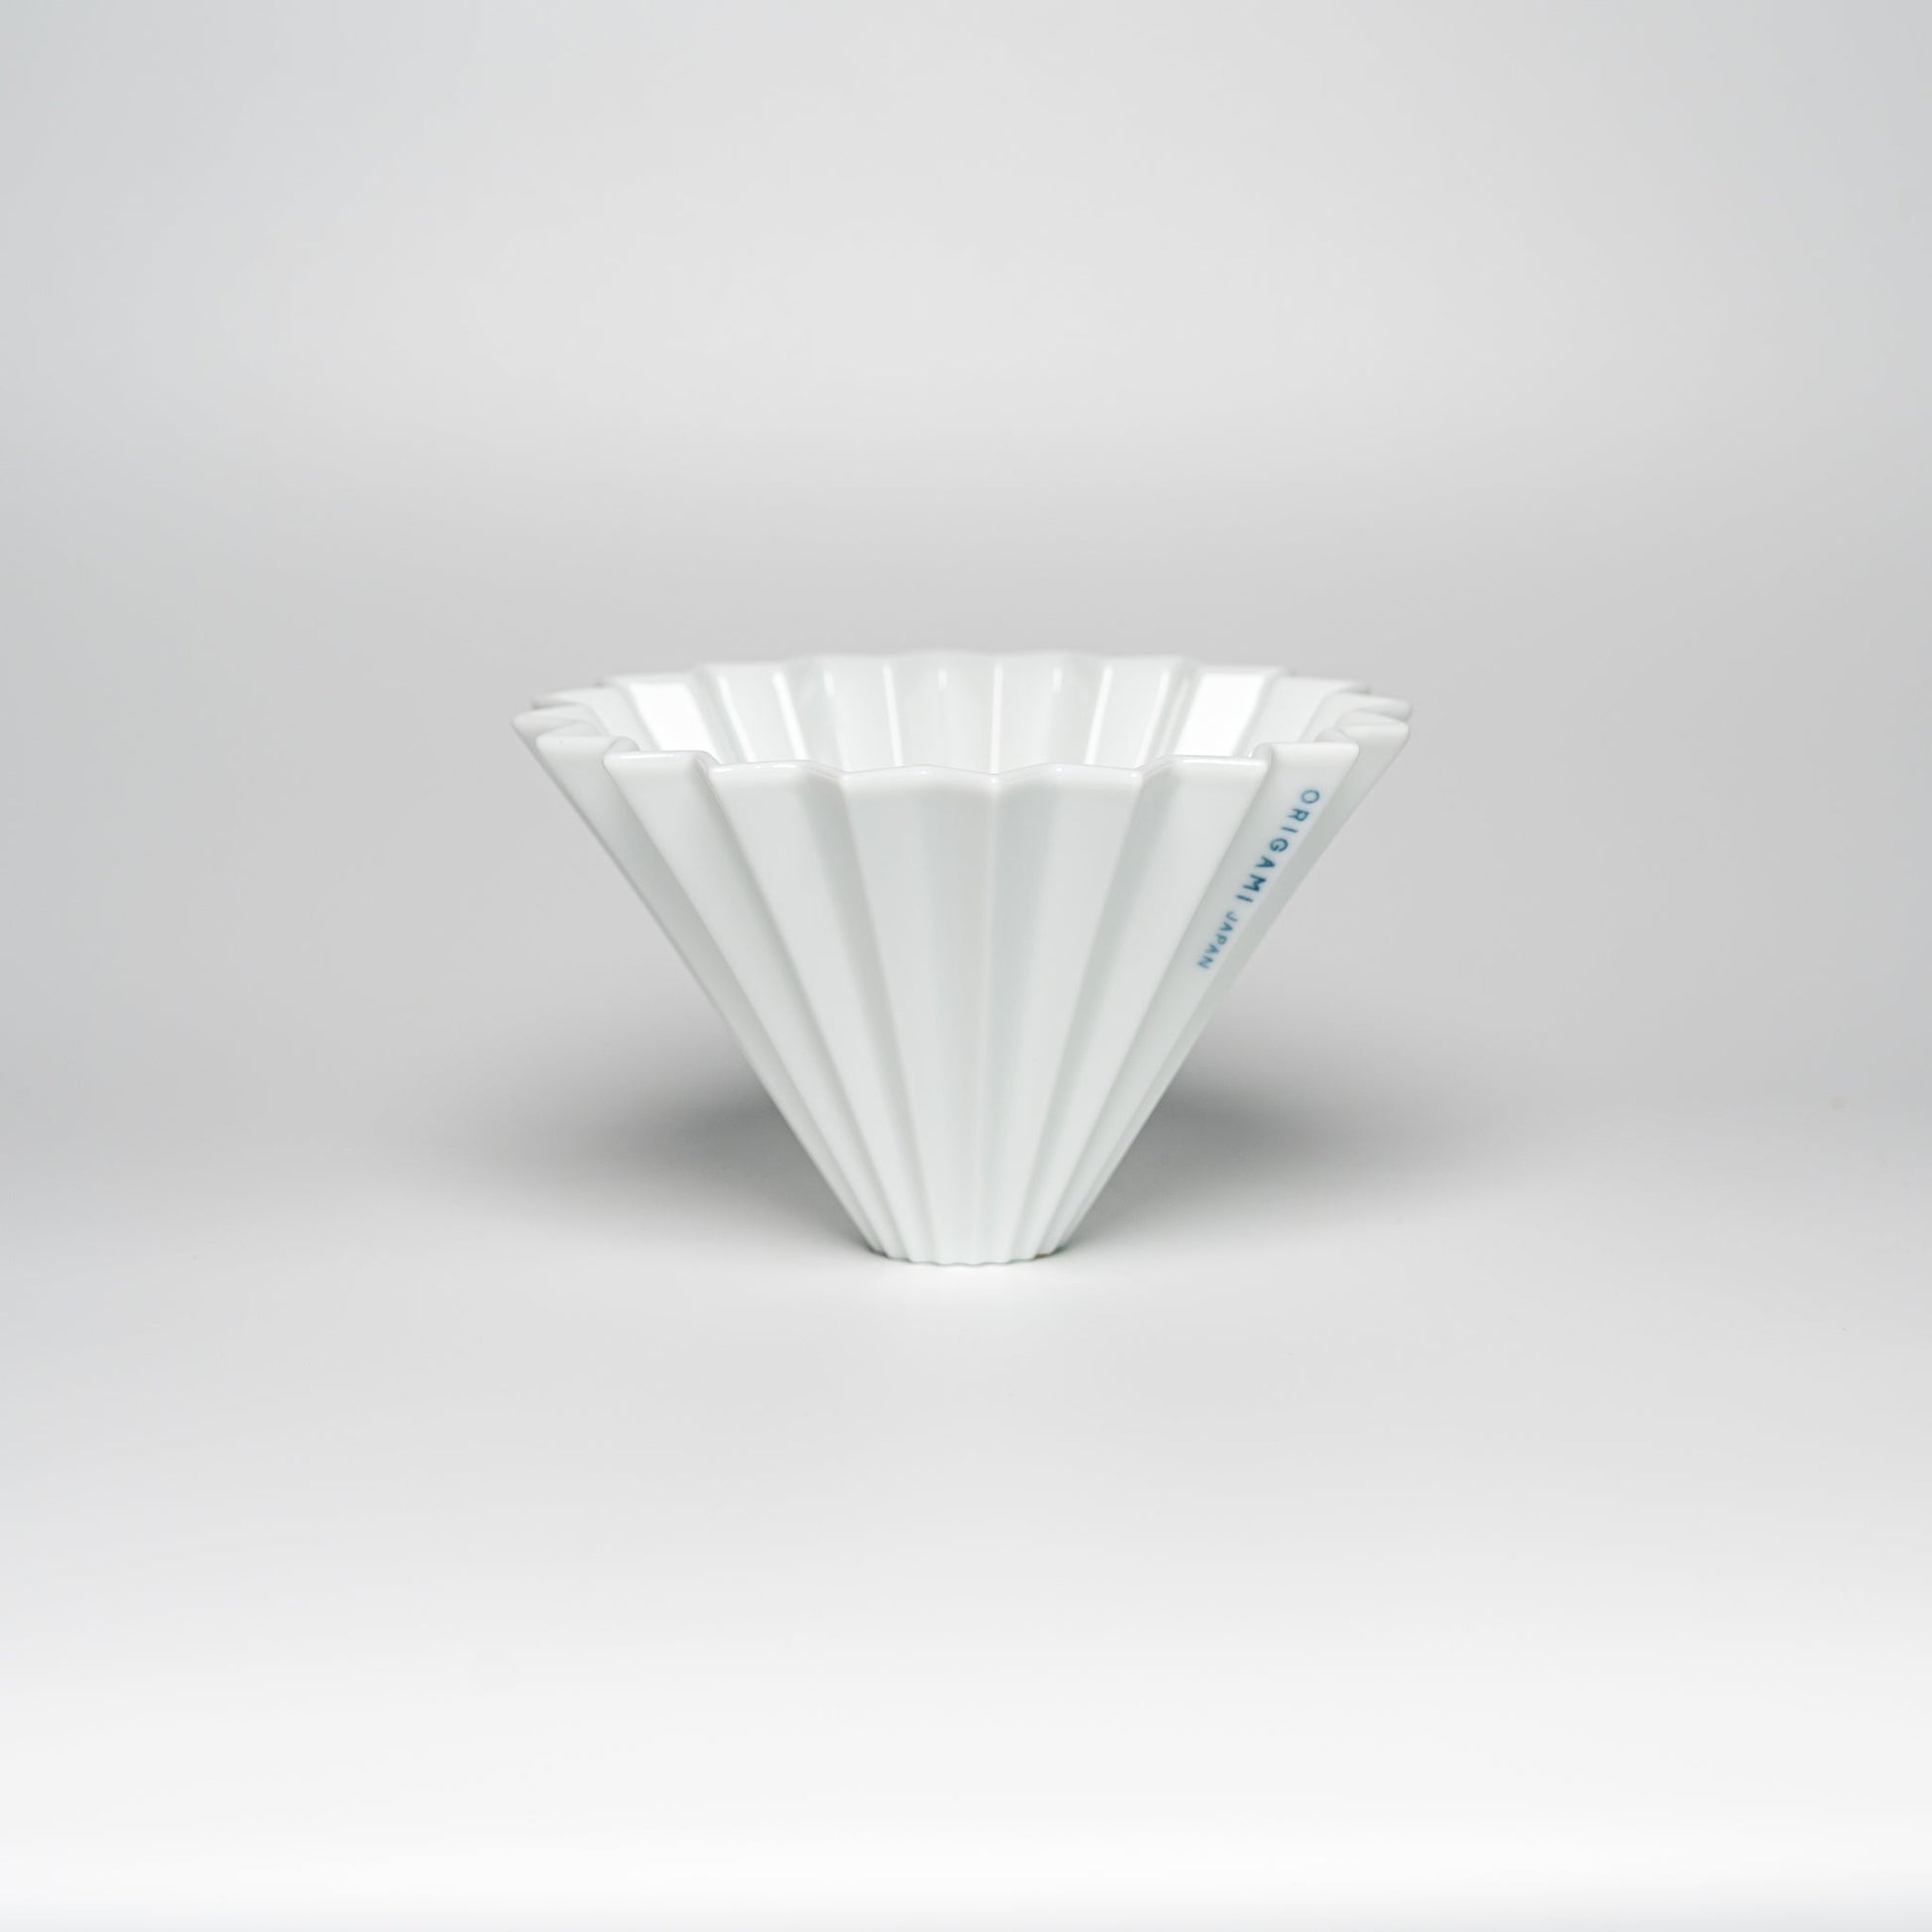 A white ORIGAMI coffee dripper on a white background